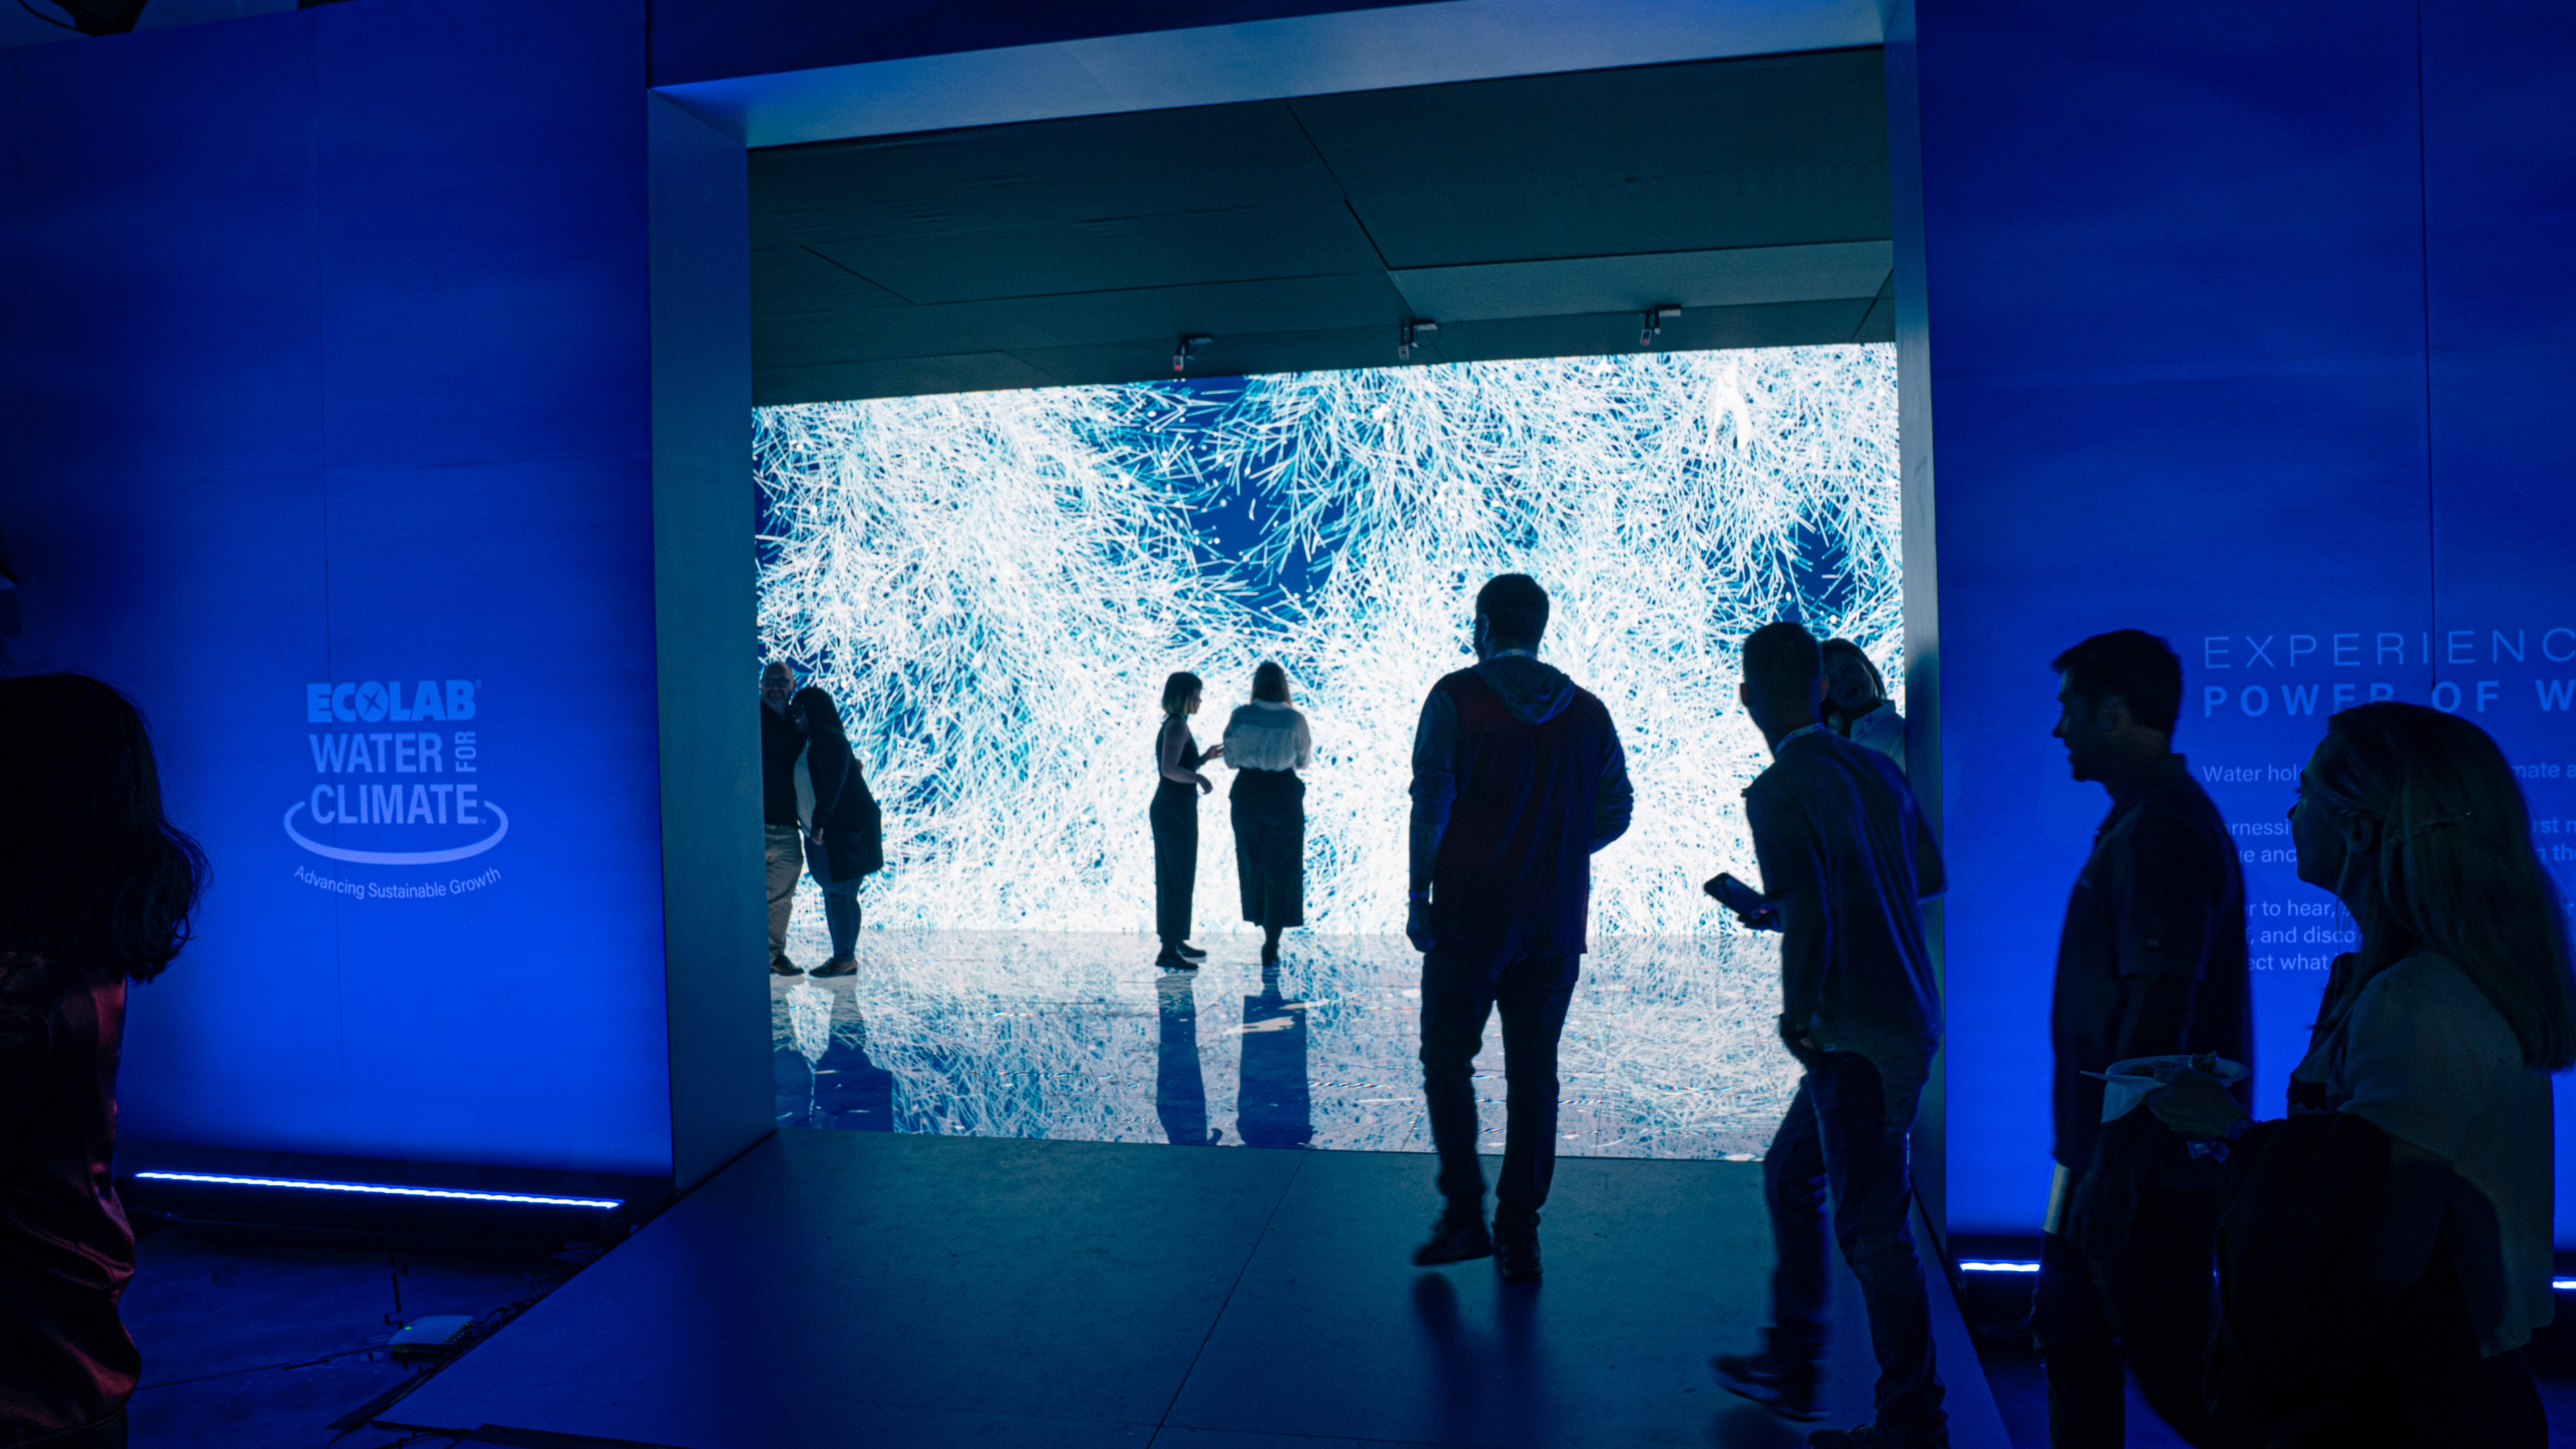 The entrance to an interactive installation with many people walking around inside and out. Ice crystals fill the screens inside the room